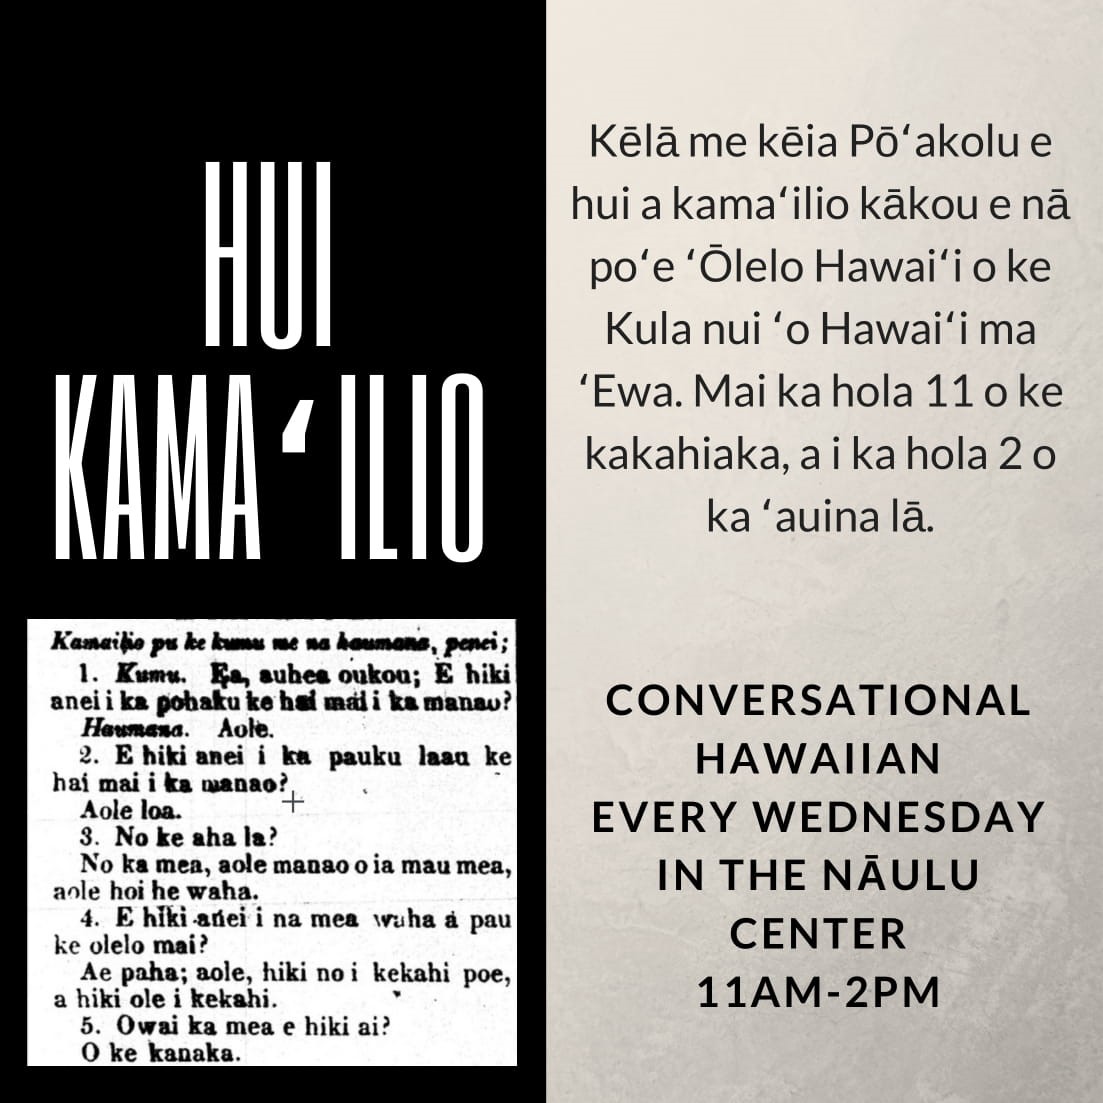 Flier for Conversational Hawaiian that shows four boxes in a square, two of which include words written in Hawaiian. The top left square includes the works Hui Kama'ilio. The lower right square has information regarding meeting time and place